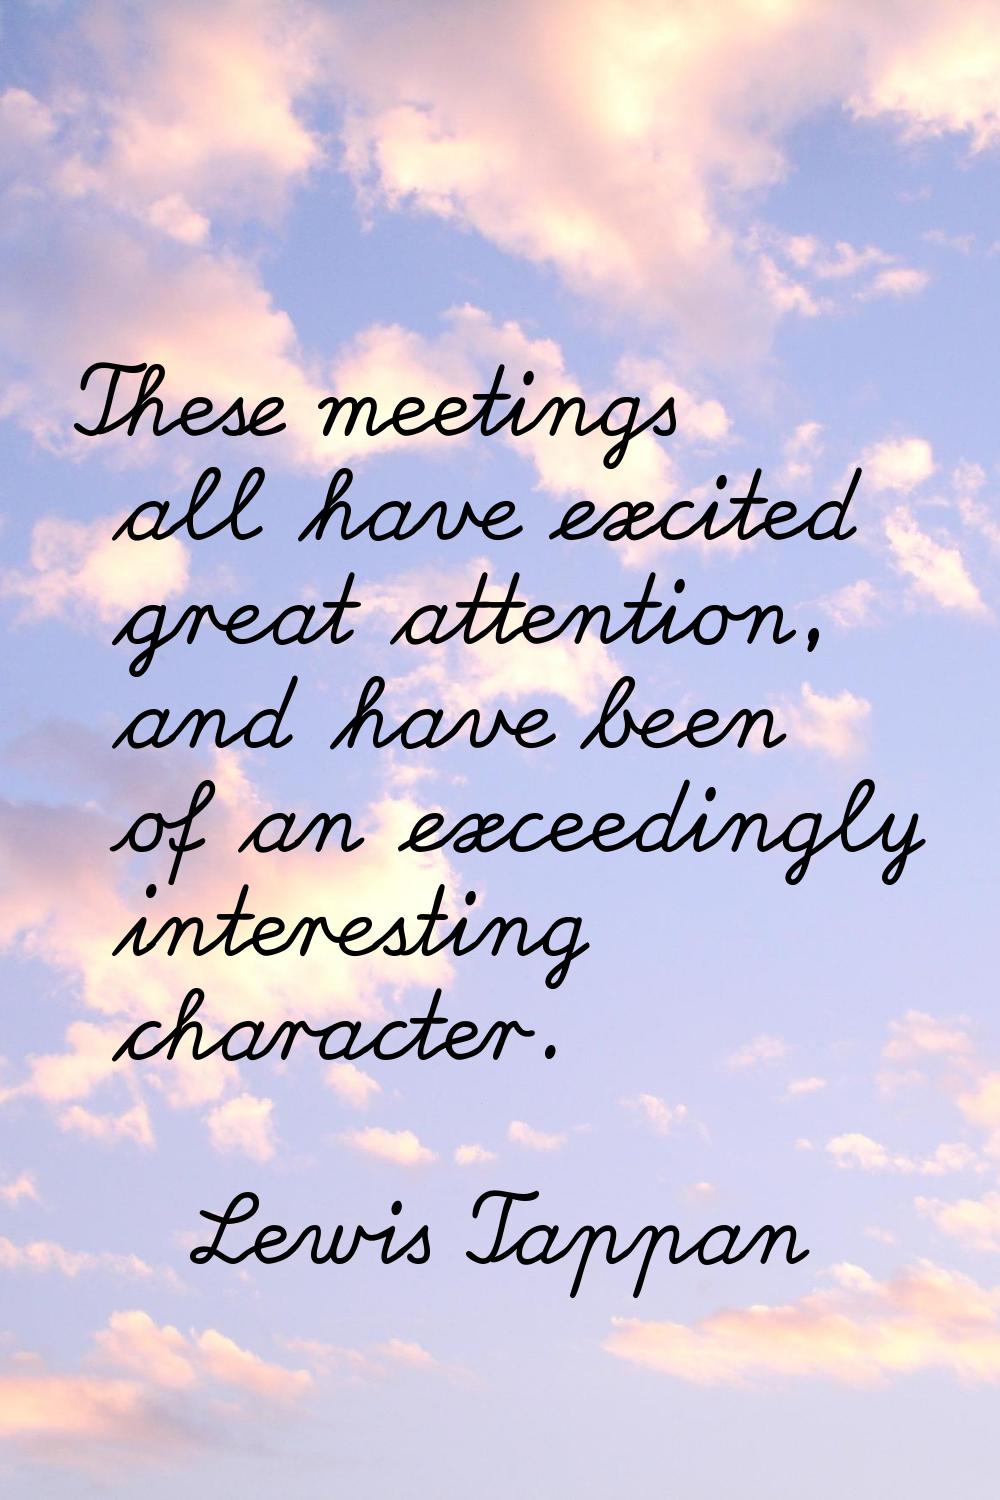 These meetings all have excited great attention, and have been of an exceedingly interesting charac